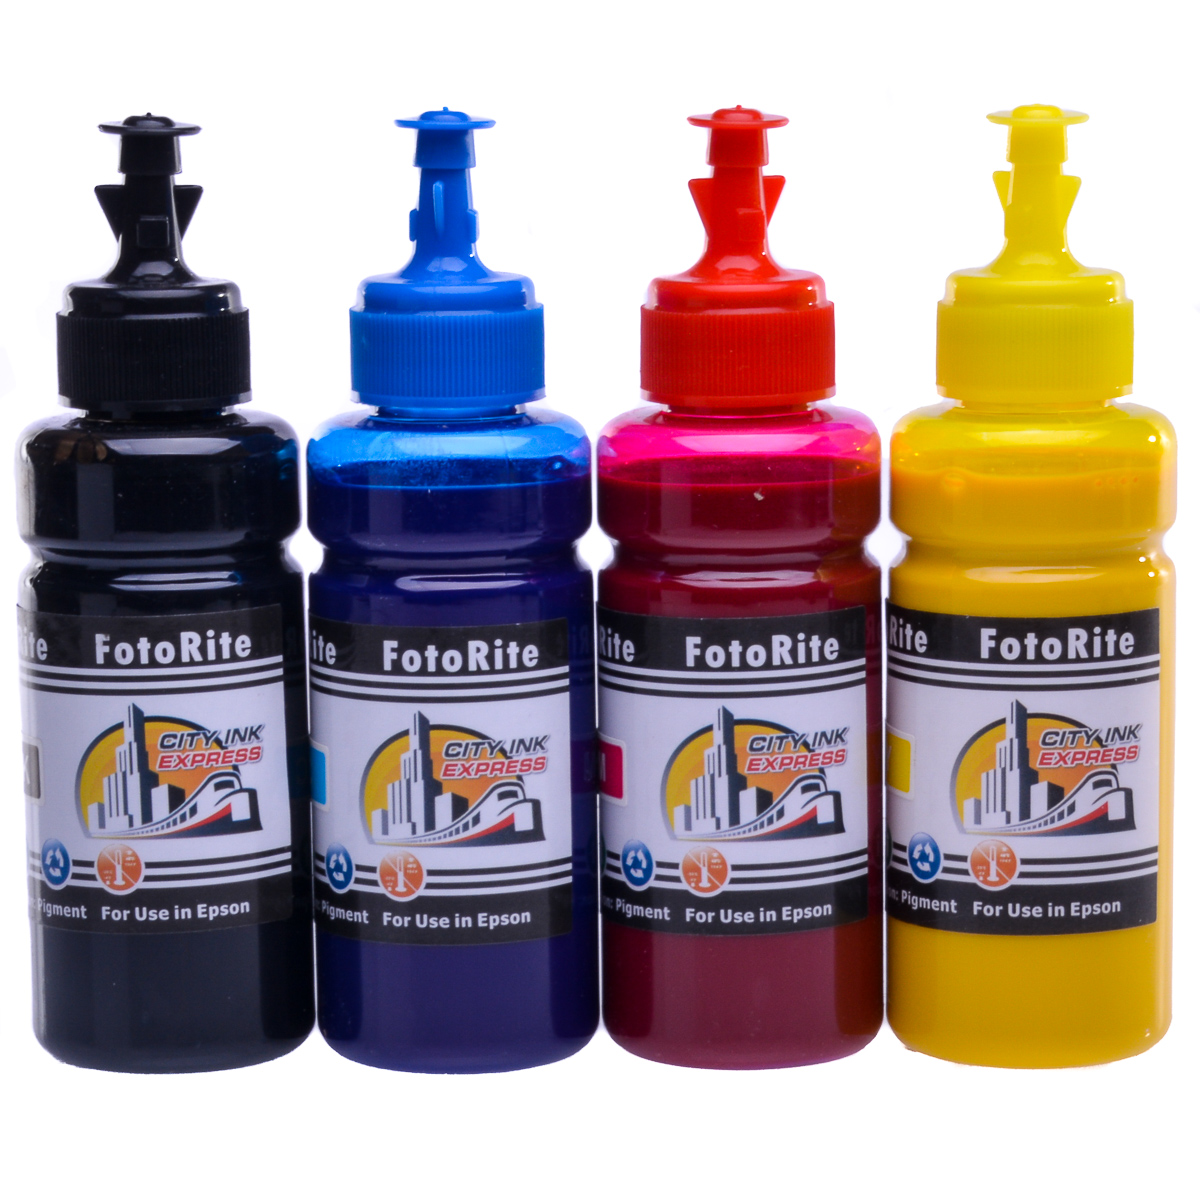 Cheap Multipack pigment ink refill replaces Epson WF-2840DWF